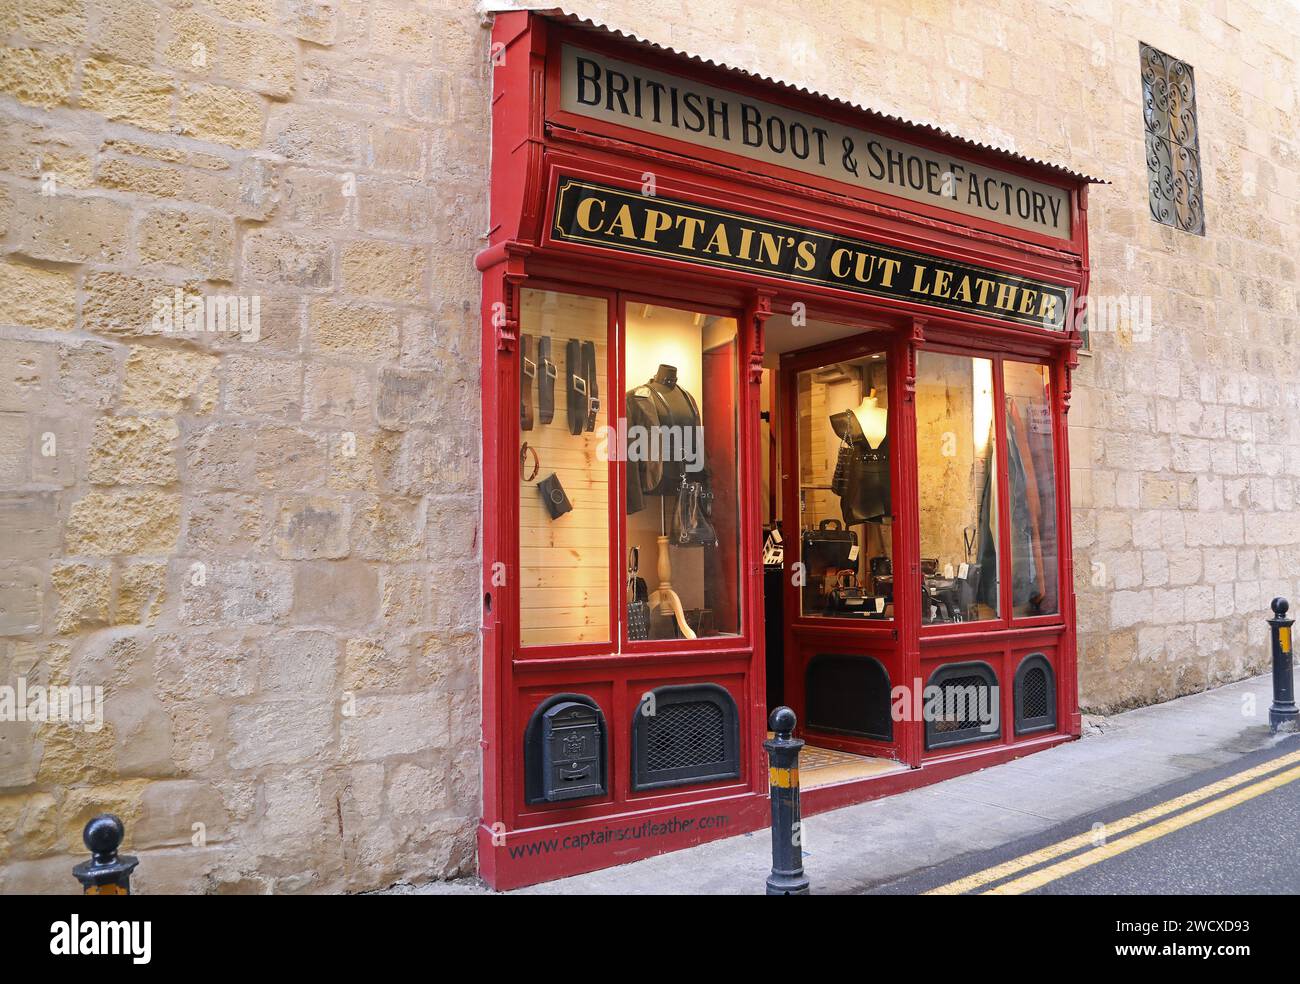 Captains Cut Leather shop in Valletta Stock Photo